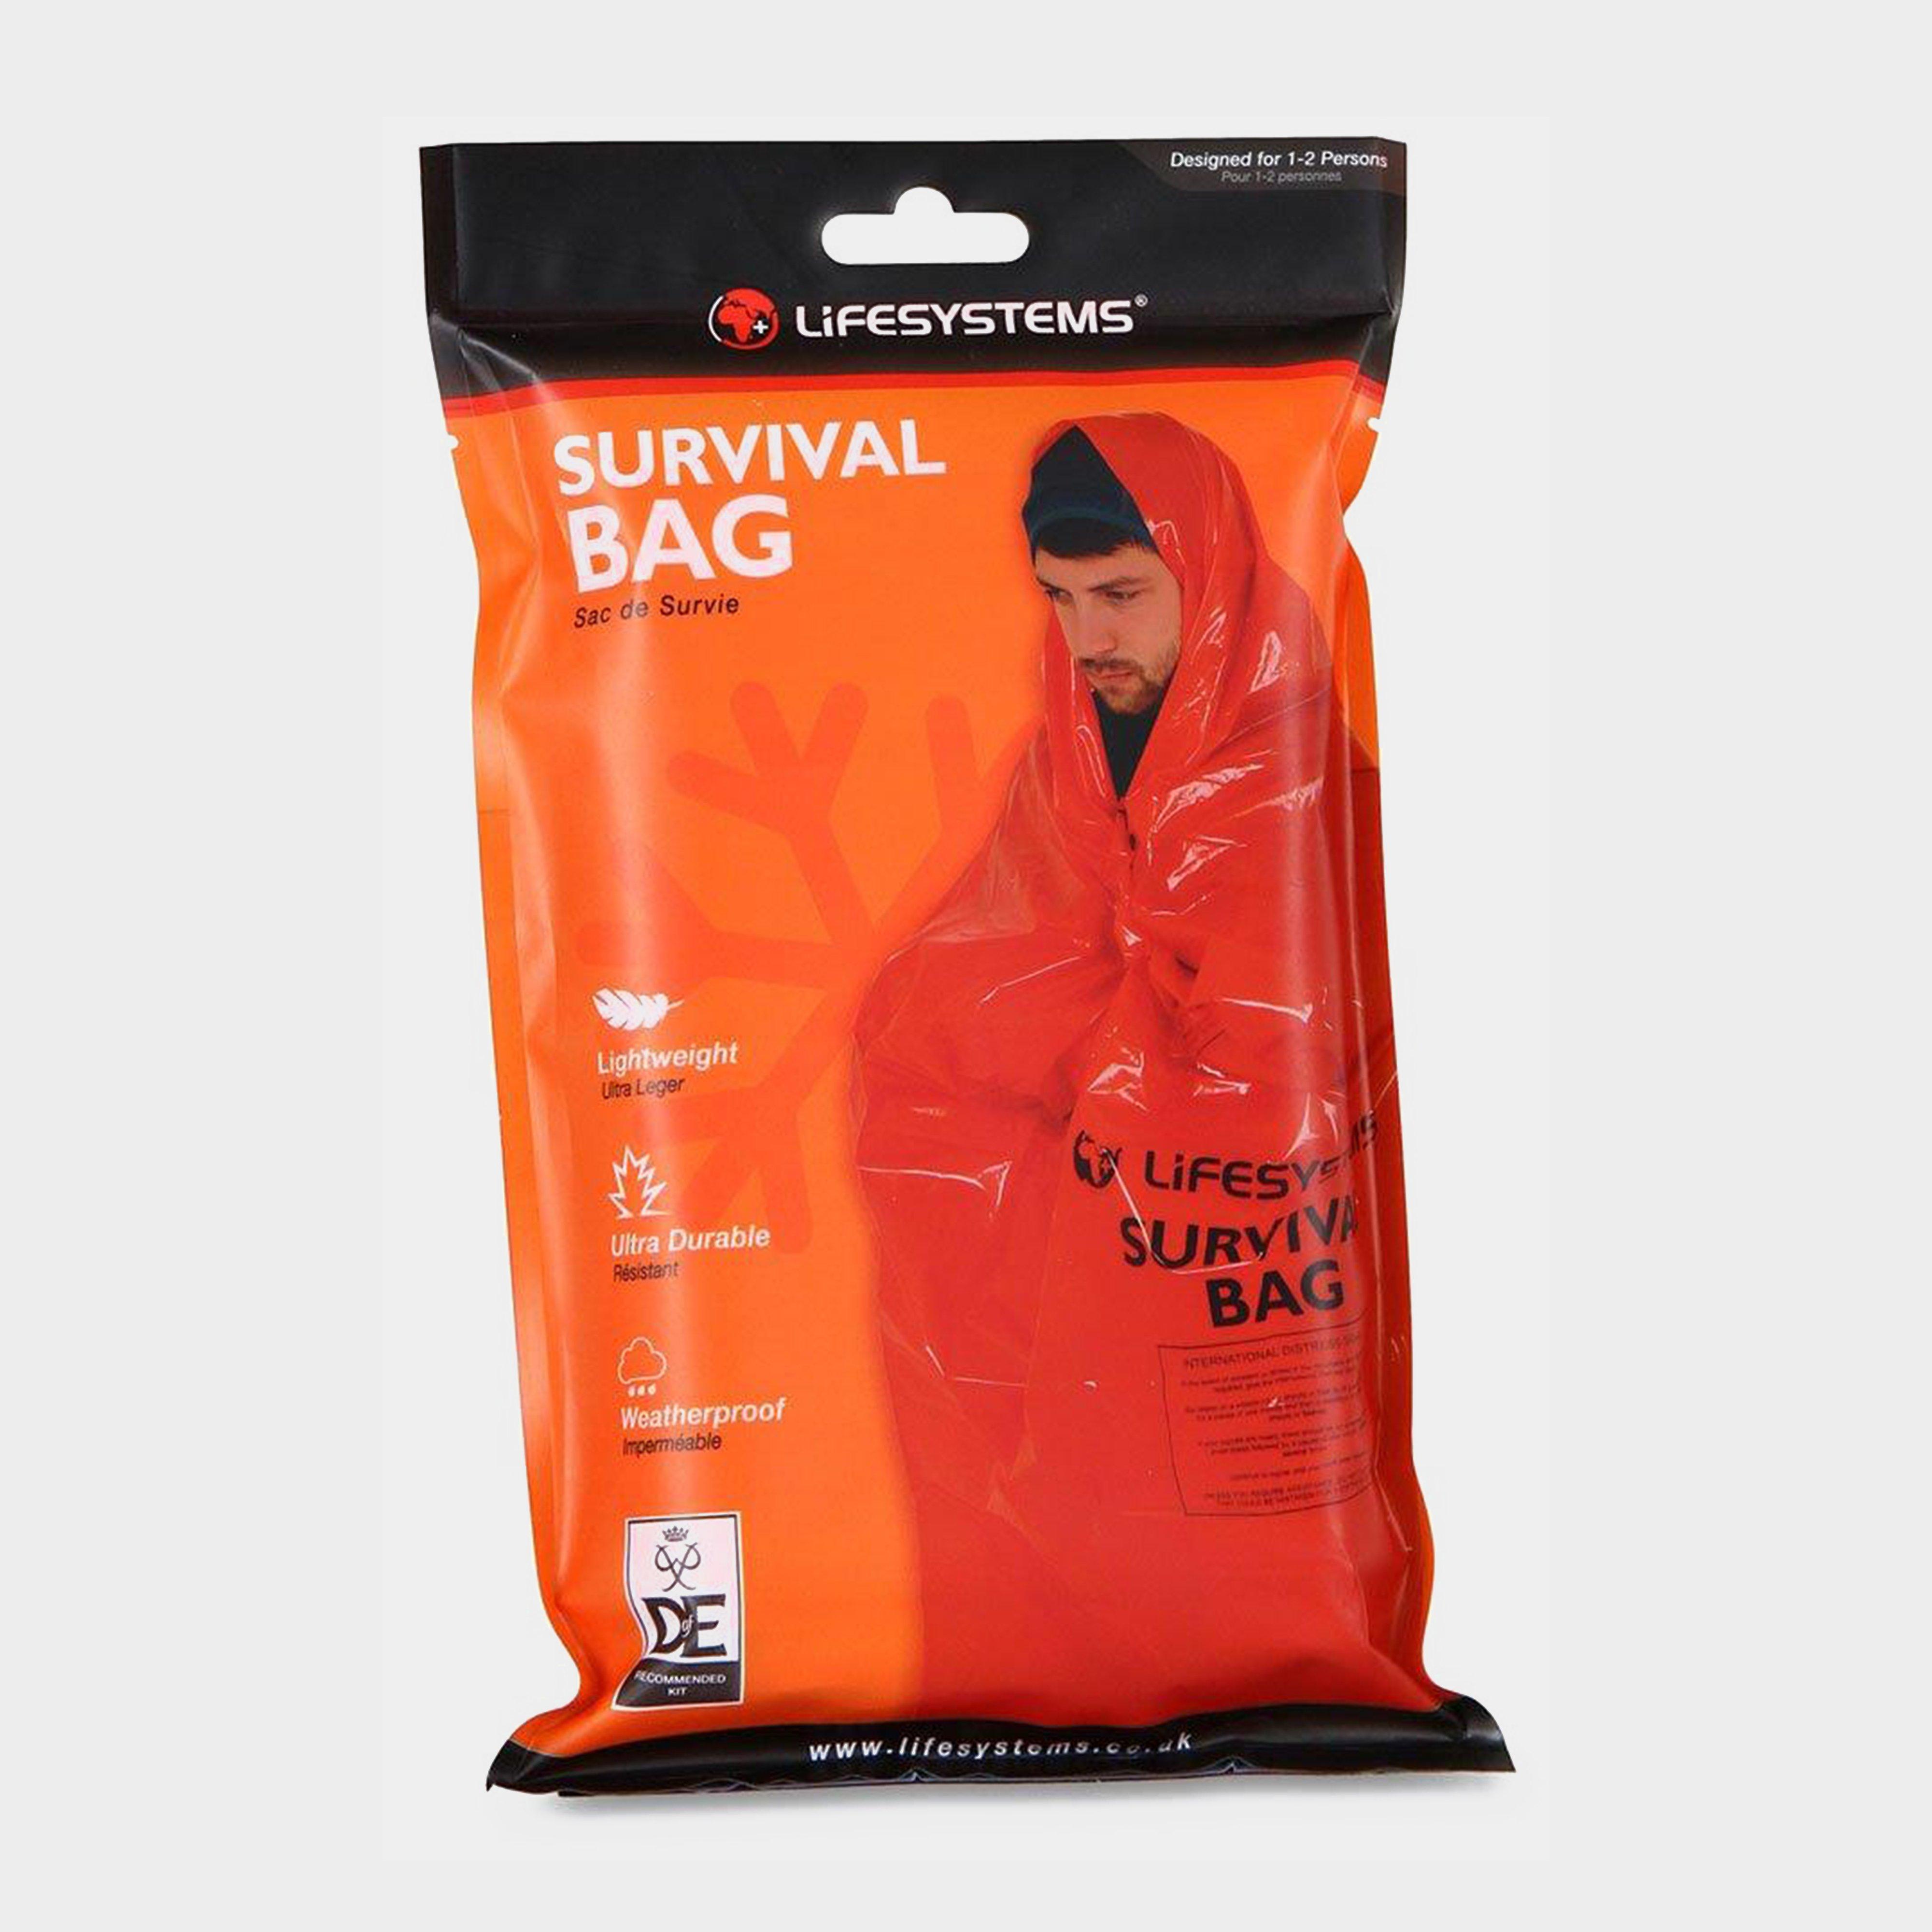 Lifesystems Survival Bag Review